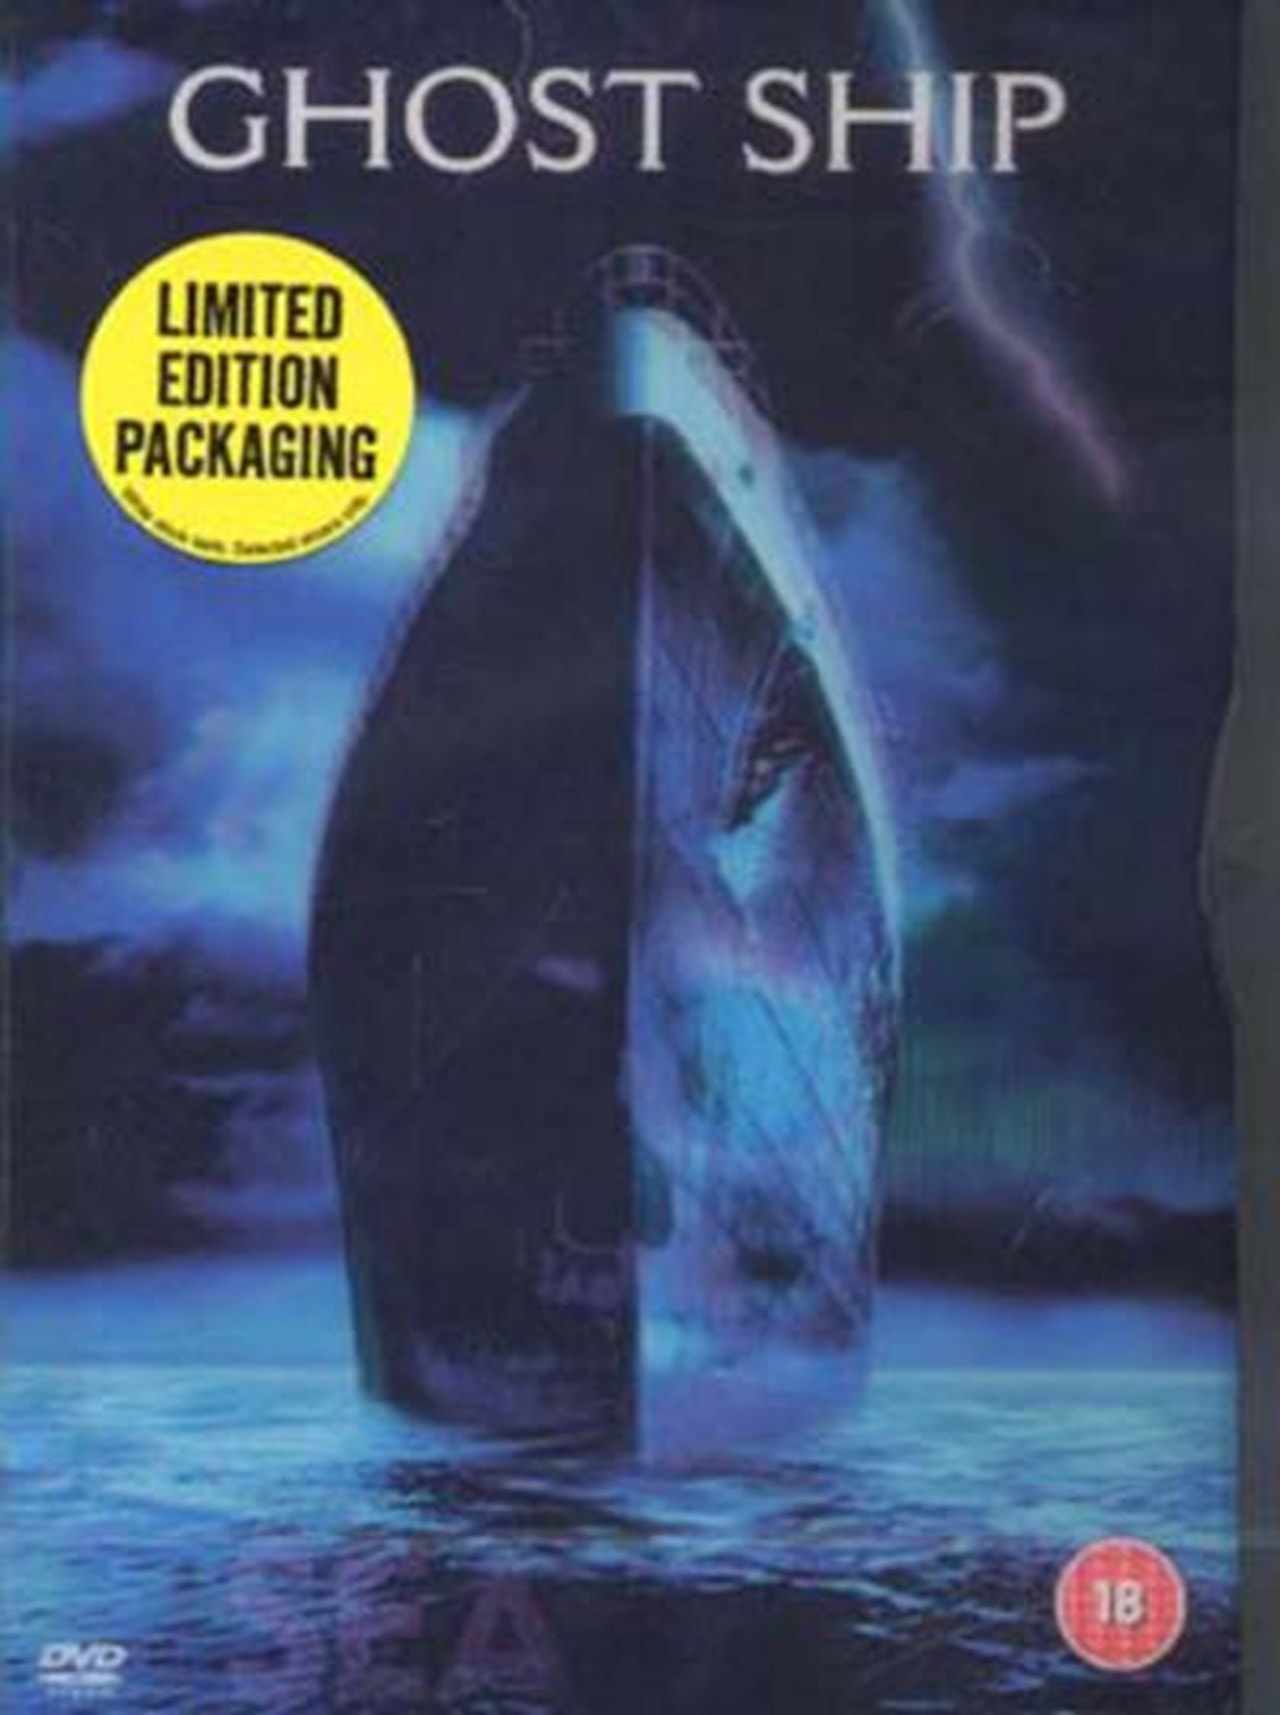 Ghost Ship | DVD | Free shipping over £20 | HMV Store